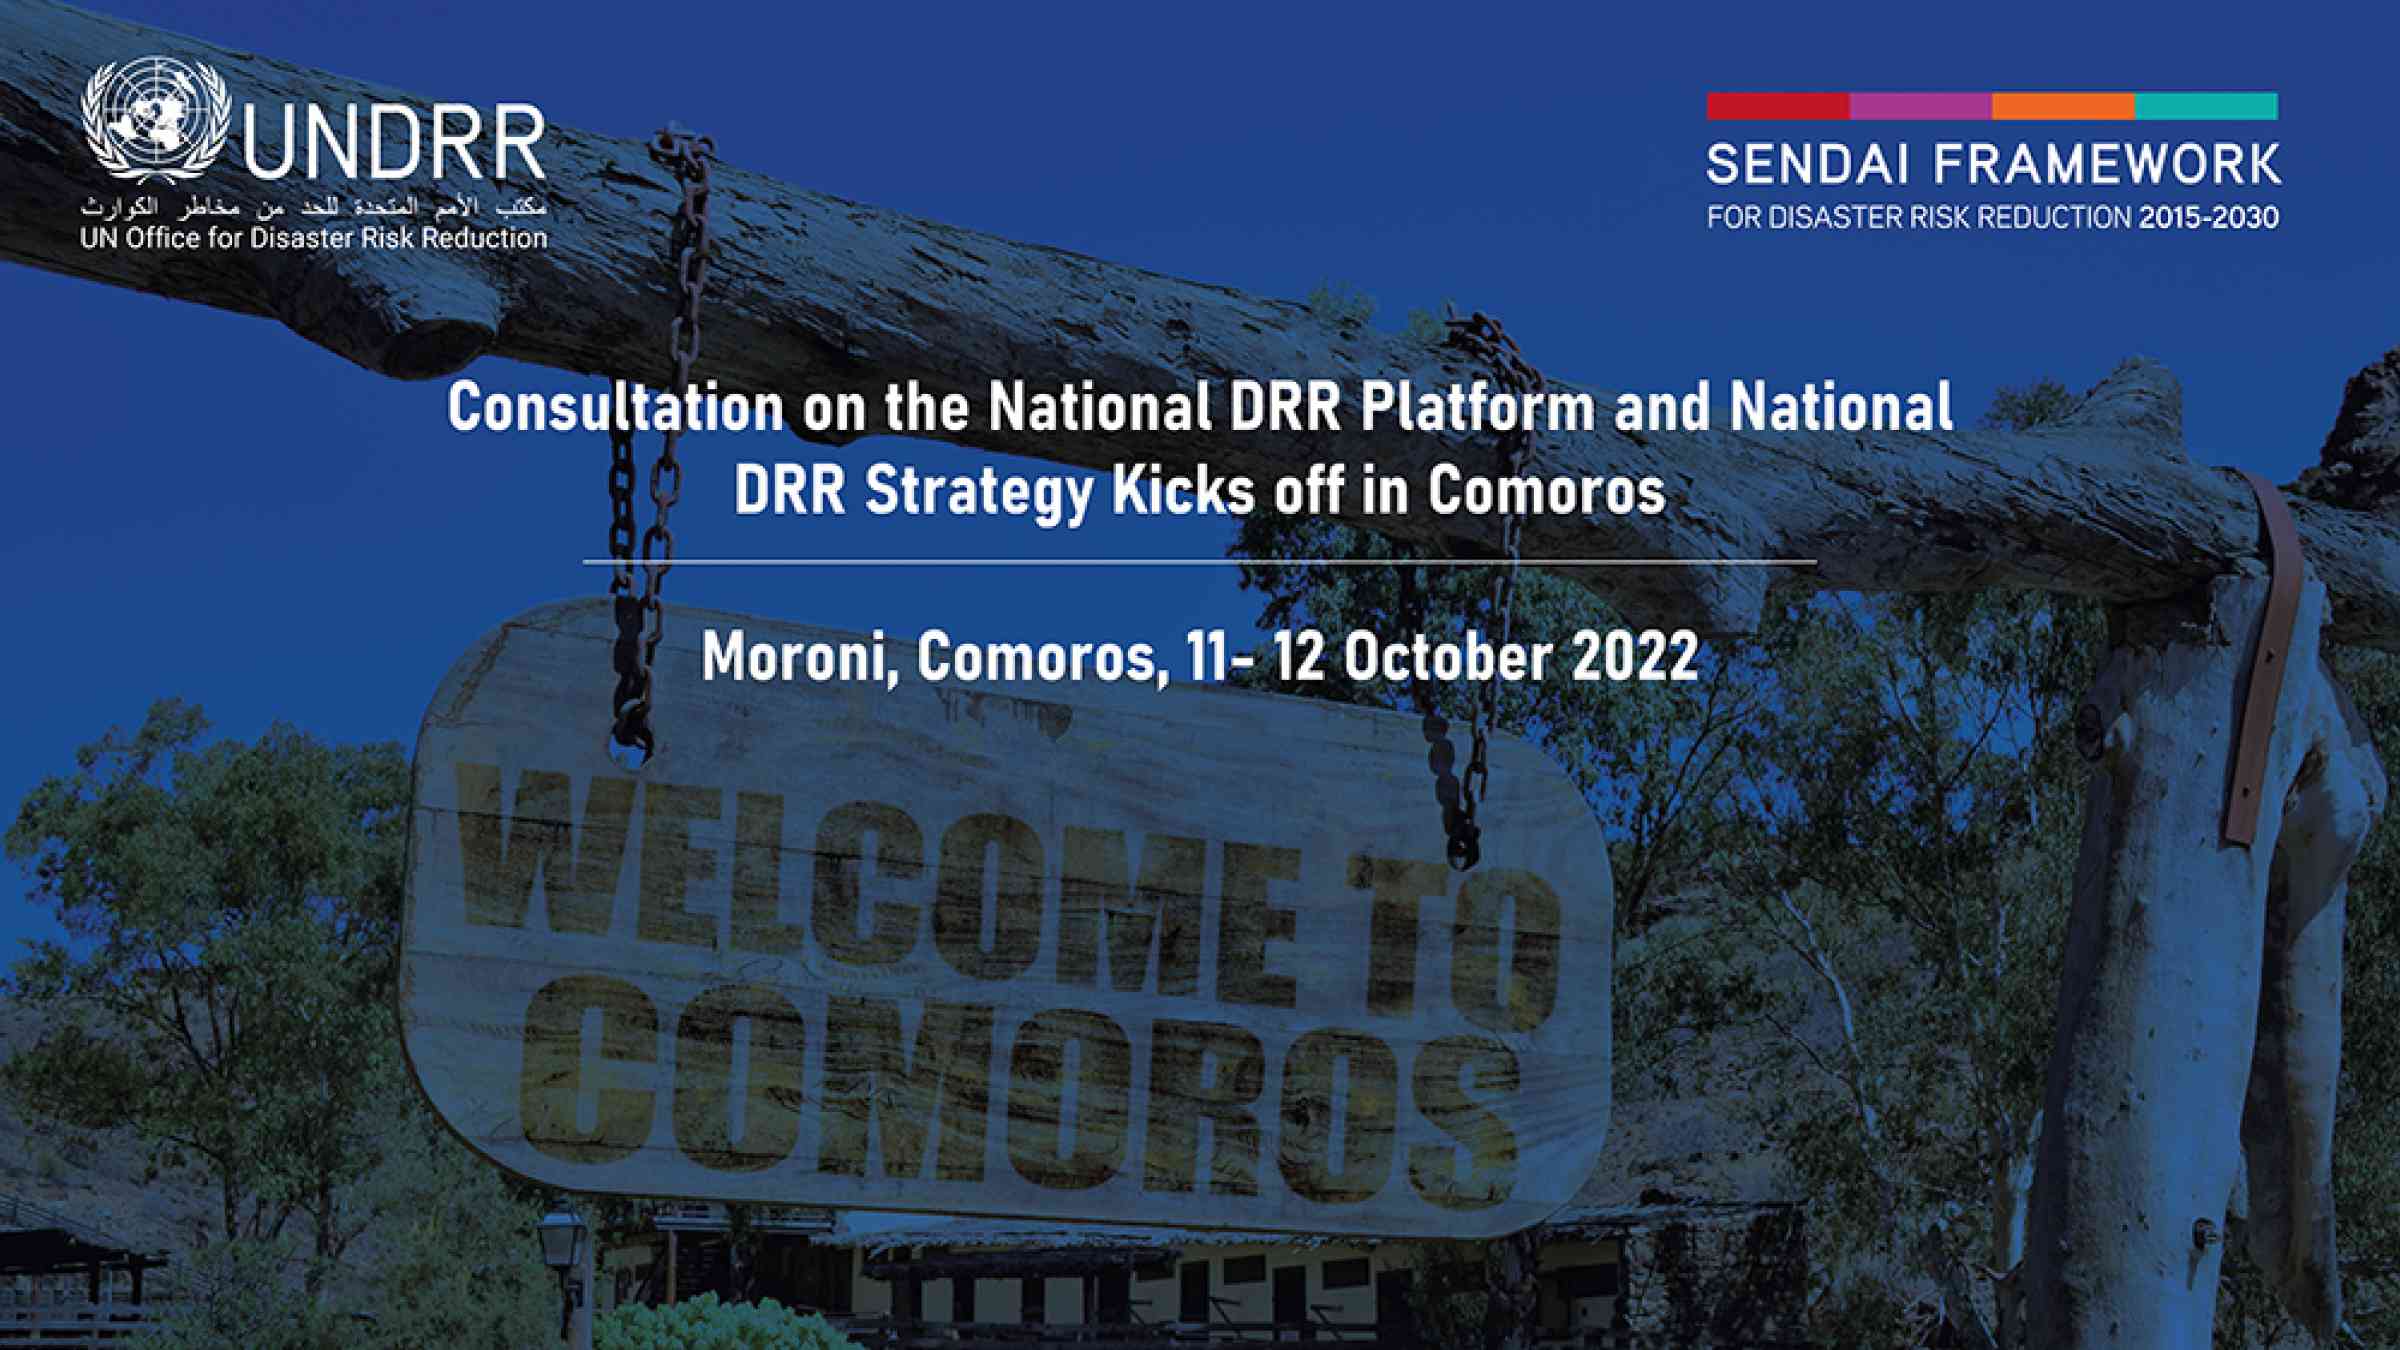 National Disaster Risk Reduction Platform and National DRR Strategy in Comoros